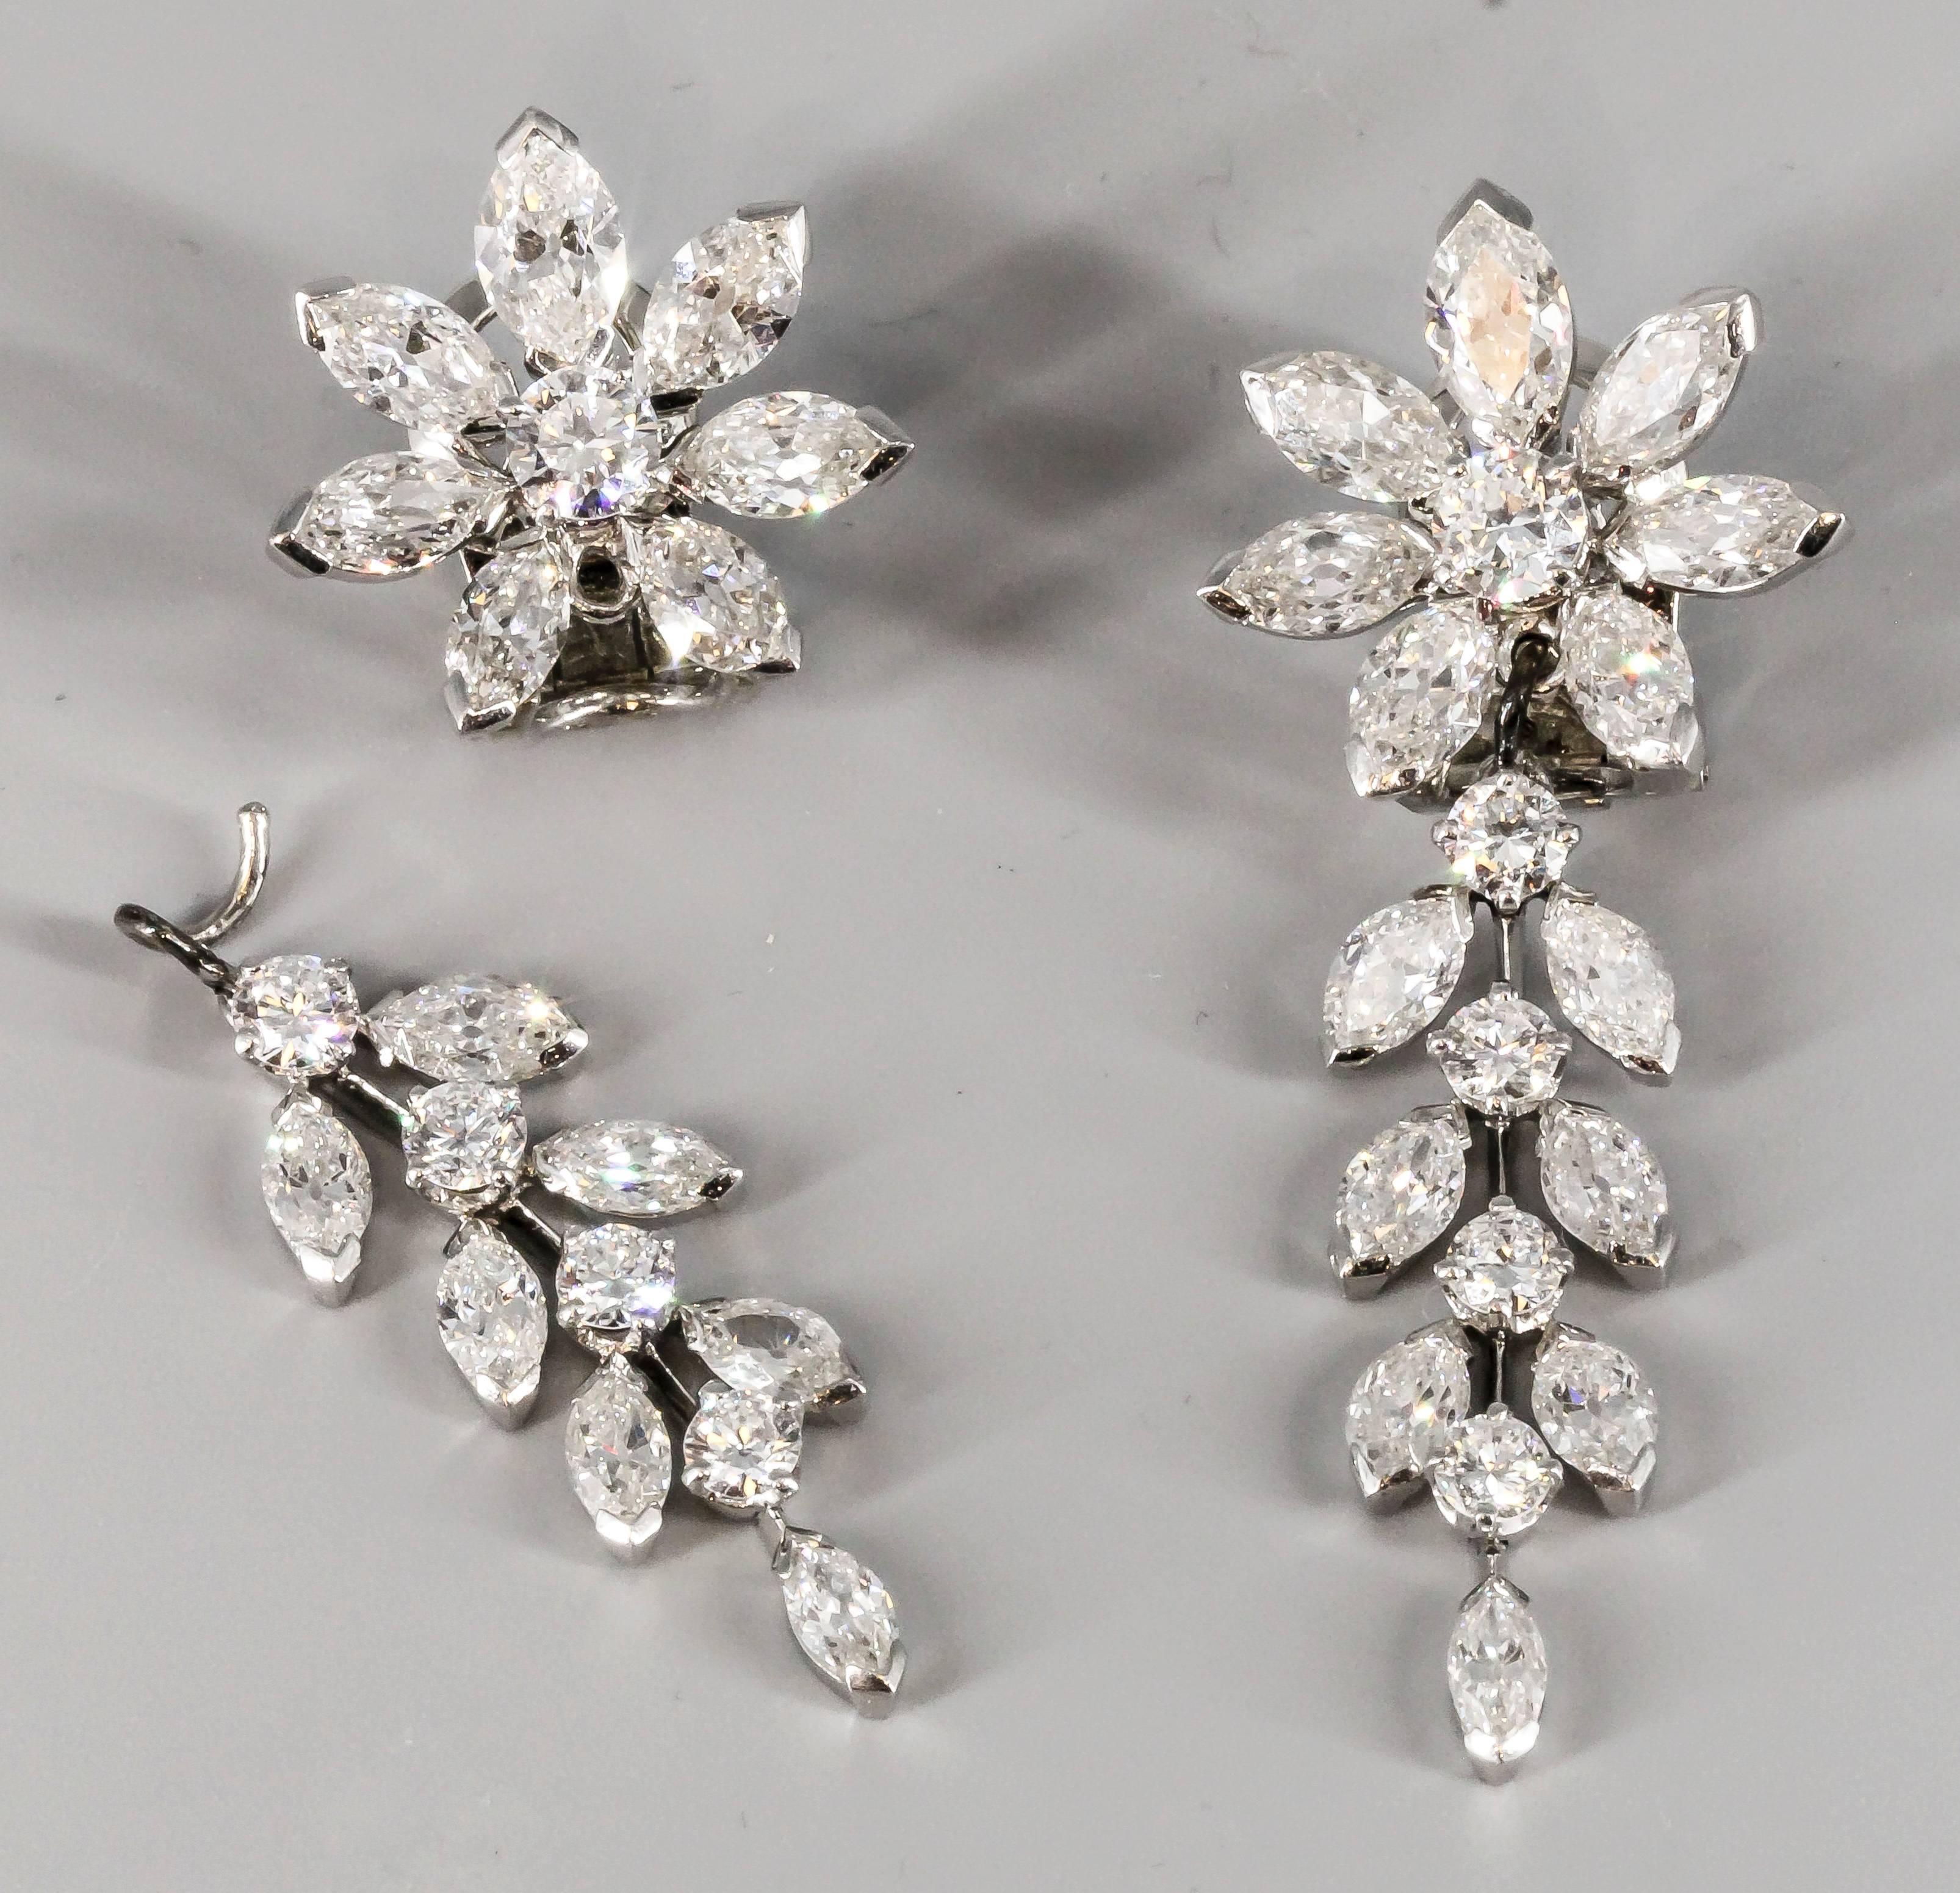 Elegant diamond, platinum and 18K white gold pendant earrings by Van Cleef & Arpels. circa 1960s. They feature high grade round brilliant cut and marquise cut diamonds of approx. 12 carats of total weight. Designed to resemble a flower, the top of